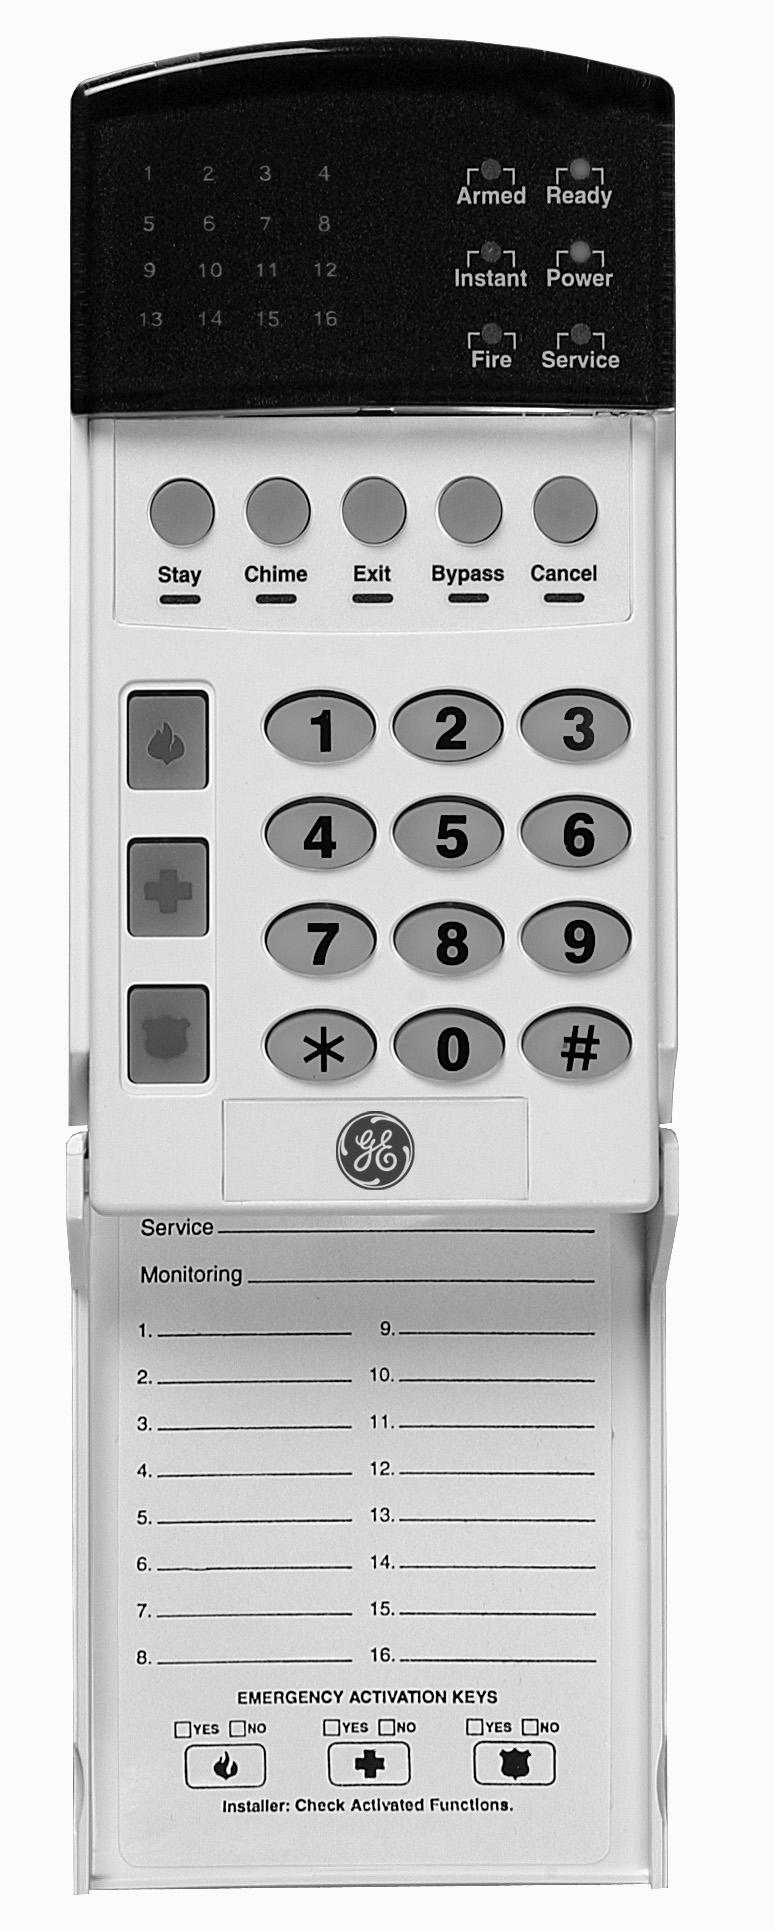 NX-1500E LED Keypad includes NX-1508E and NX-1516E ARMED Light is "on" when armed, "off" when disarmed. Flashes to indicate a previous alarm.